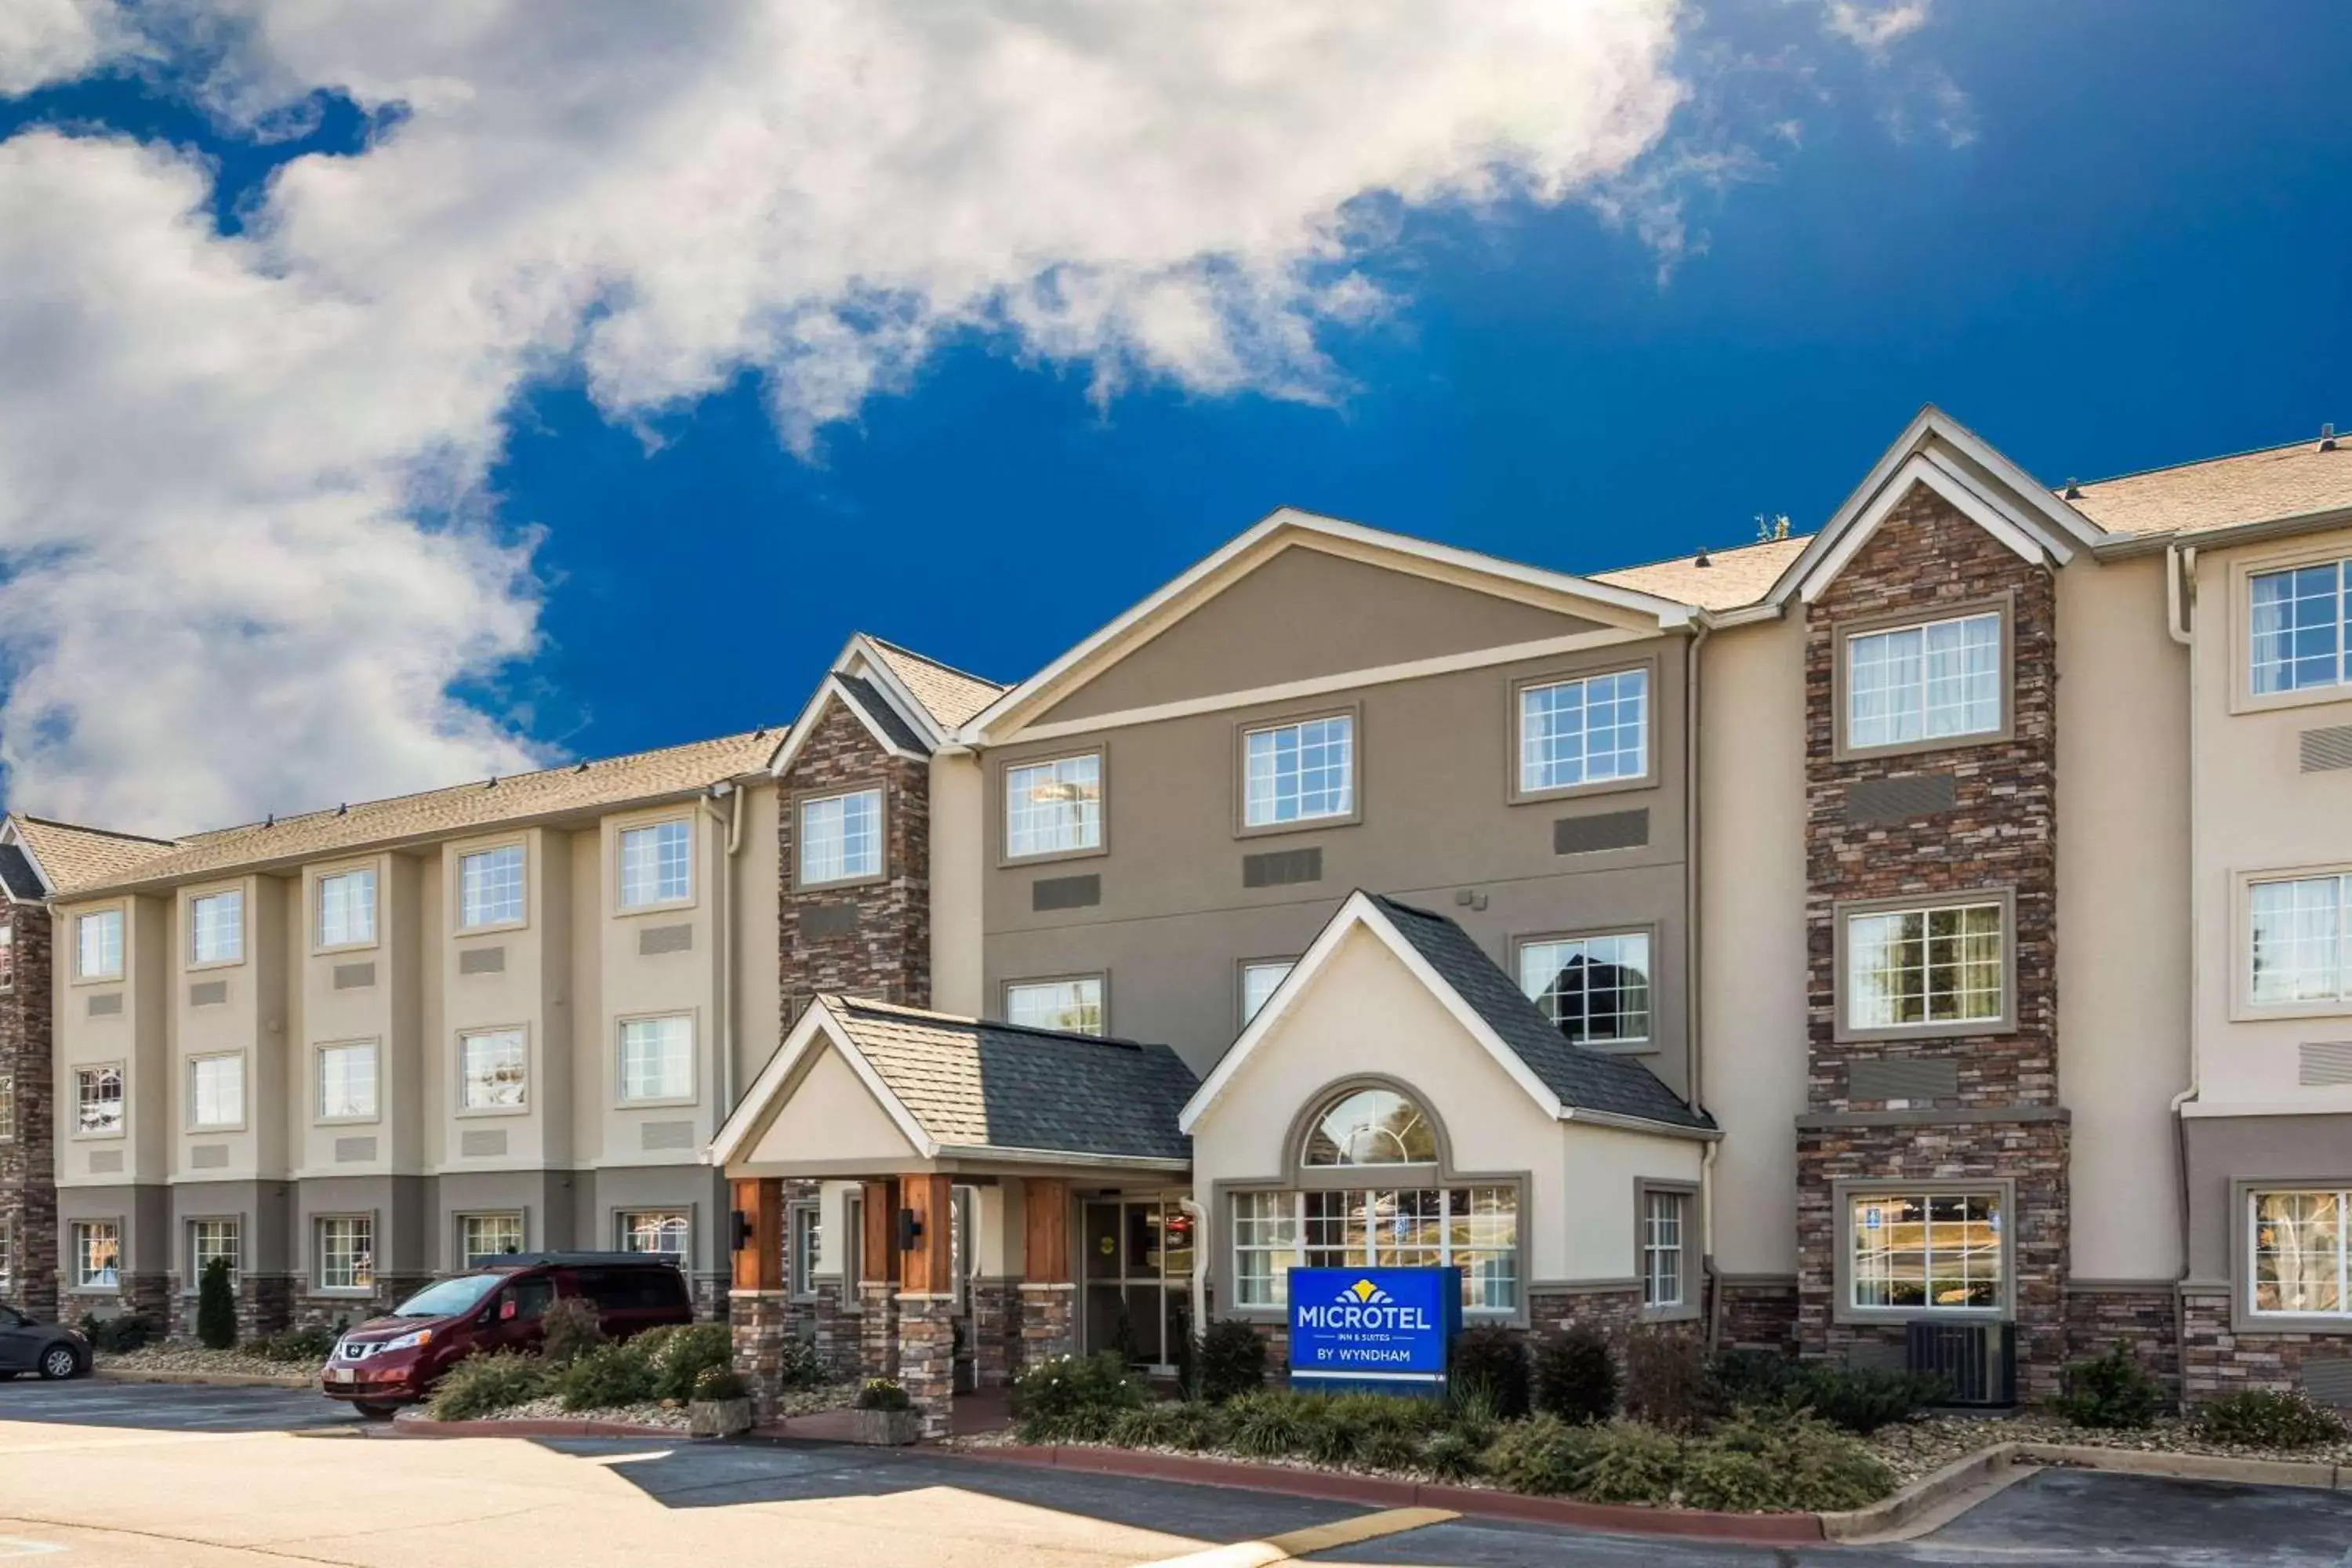 Property Building in Microtel Inn & Suites - Greenville